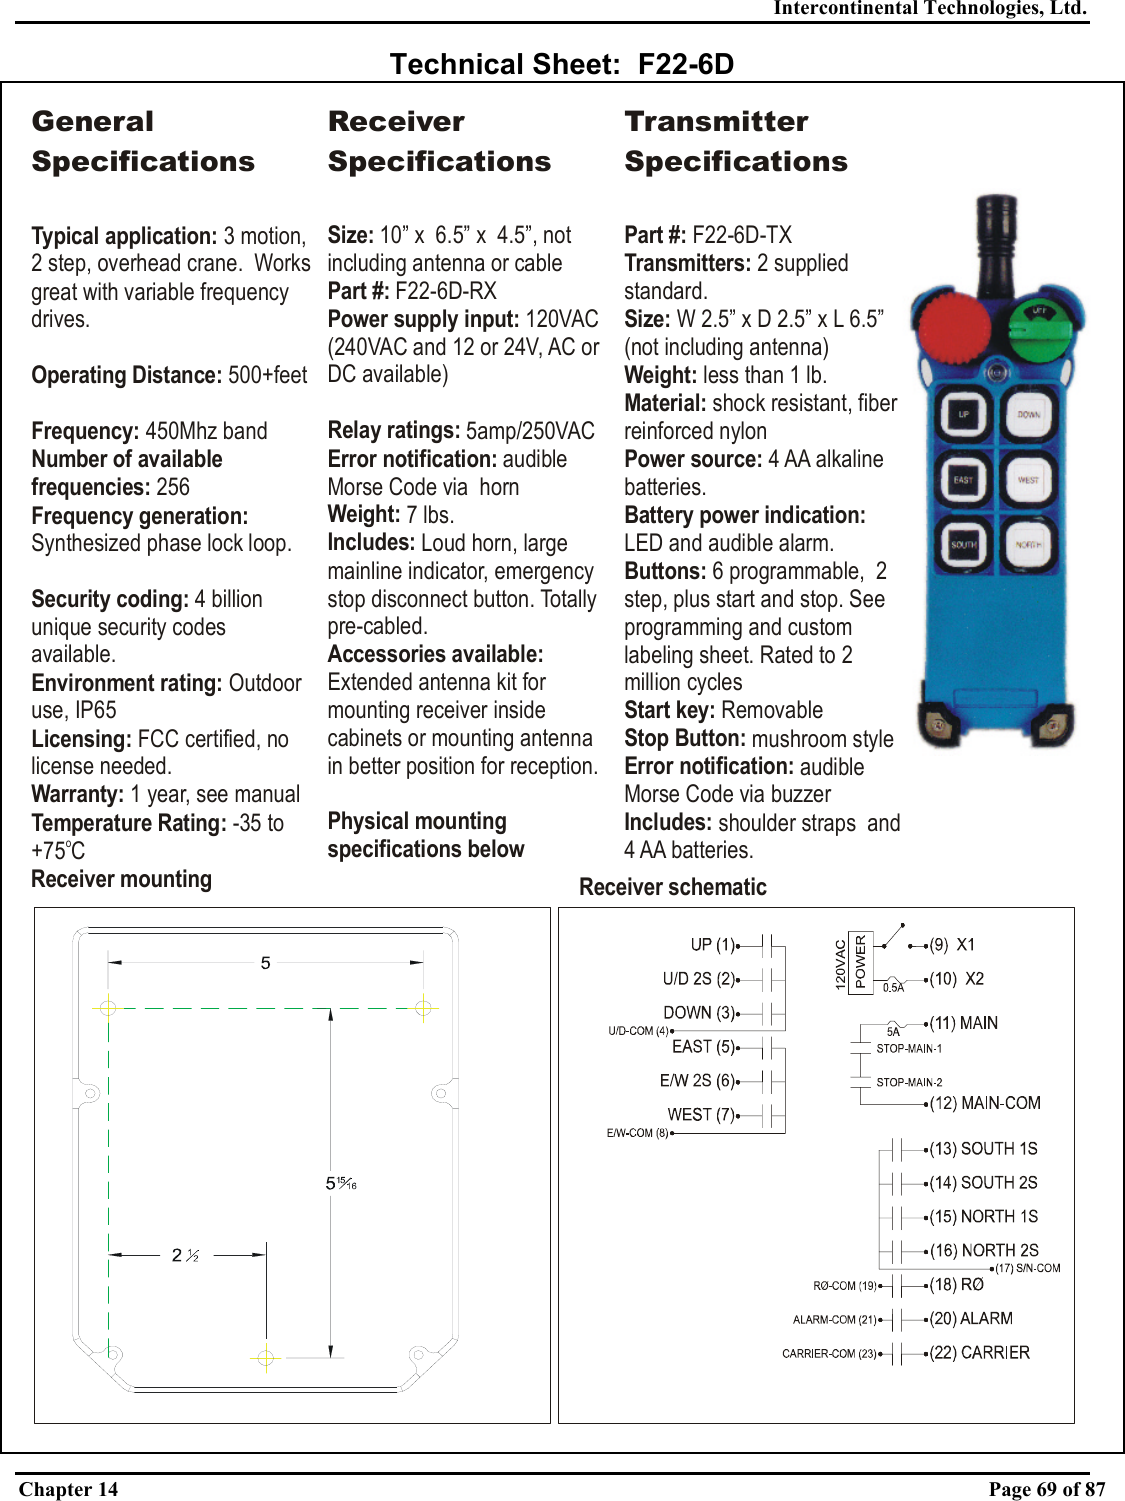 Intercontinental Technologies, Ltd. Chapter 14    Page 69 of 87  Technical Sheet:  F22-6D Receiver mounting Receiver schematicGeneral SpecificationsTypical application: Operating Distance:Frequency: Number of available frequencies:Frequency generation: Security coding: Environment rating: Licensing:Warranty:3 motion, 2 step, overhead crane.  Works great with variable frequency drives. 500+feet450Mhz band 256Synthesized phase lock loop.4 billion unique security codes available.Outdoor use, IP65 FCC certified, no license needed. 1 year, see manualTemperature Rating: -35 to +75 CoReceiver SpecificationsSize: 10” x  6.5” x  4.5”, not including antenna or cableand 12 or 24V, AC or DC available)Part #:Power supply input: Relay ratings: Error notification: Weight: Includes: Accessories available: Physical mounting specifications below F22-6D-RX120VAC (240VAC 5amp/250VACaudible Morse Code via  horn7 lbs.Loud horn, large mainline indicator, emergency stop disconnect button. Totally pre-cabled.Extended antenna kit for mounting receiver inside cabinets or mounting antenna in better position for reception.Transmitter SpecificationsPart #: Transmitters: Size: Weight:  Material: Power source: Buttons: Start key: Stop Button: ication: Includes: F22-6D-TX2 supplied standard.W 2.5” x D 2.5” x  less than 1 lb.shock resistant, fiber reinforced nylon4 AA alkaline batteries.6 programmable,  2 step, plus start and stop. See programming and custom labeling sheet. Rated to 2 million cyclesRemovablemushroom styleaudible Morse Code via buzzershoulder straps  and 4 AA batteries.L 6.5” (not including antenna)LED and audible alarm.Battery power indication: Error notif 